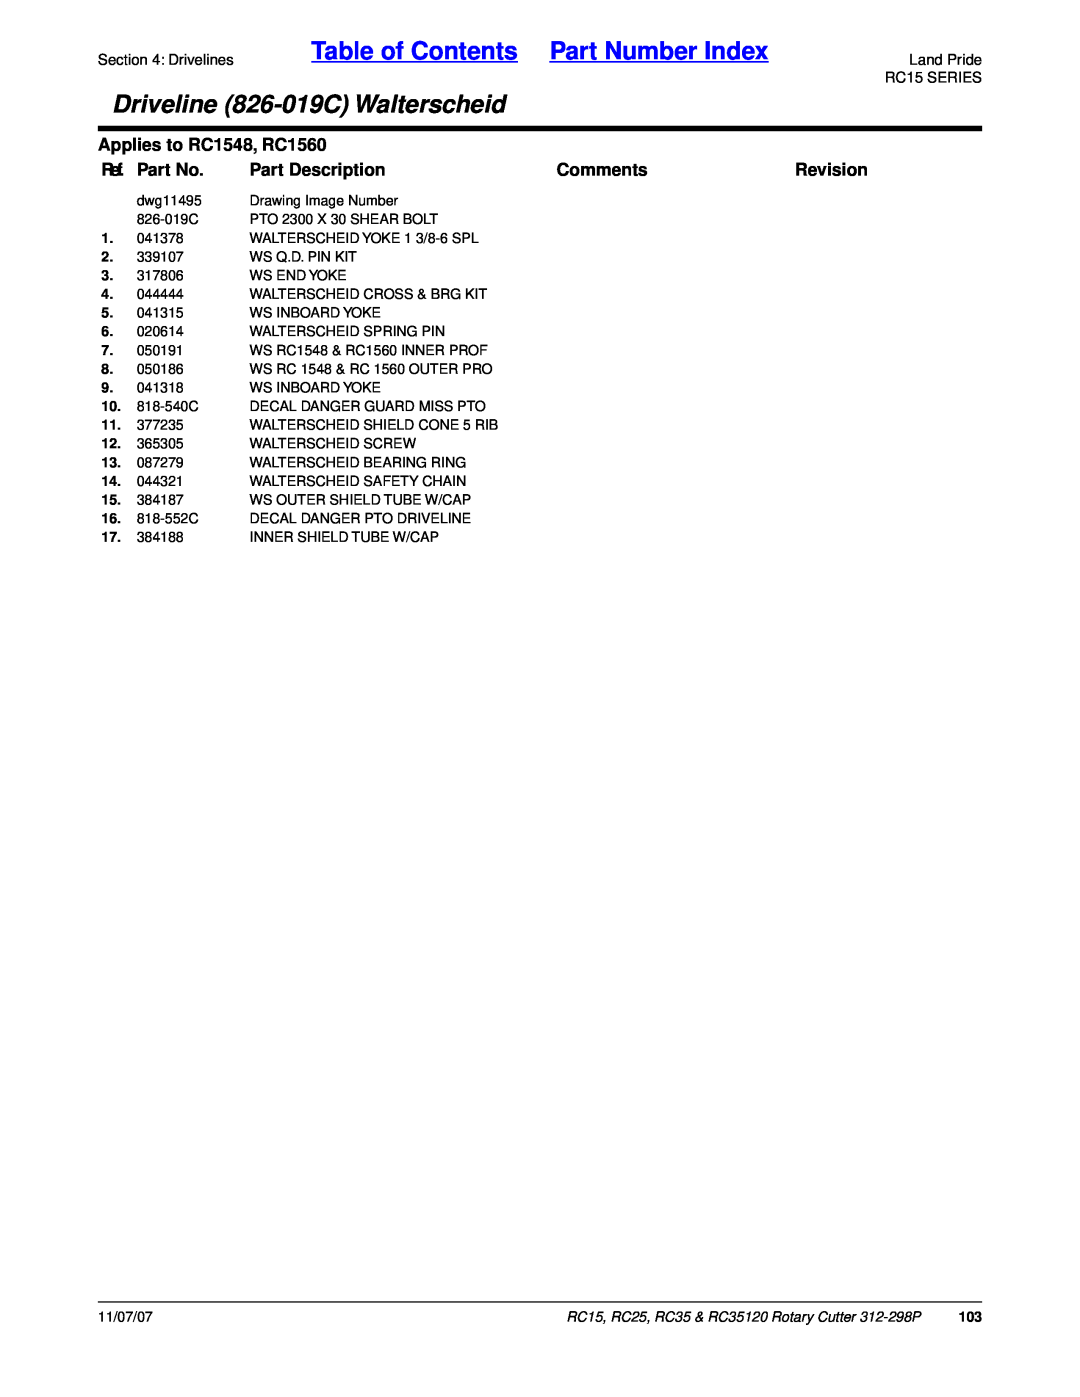 Land Pride Table of Contents Part Number Index, Driveline 826-019CWalterscheid, Applies to RC1548, RC1560, Ref. Part No 